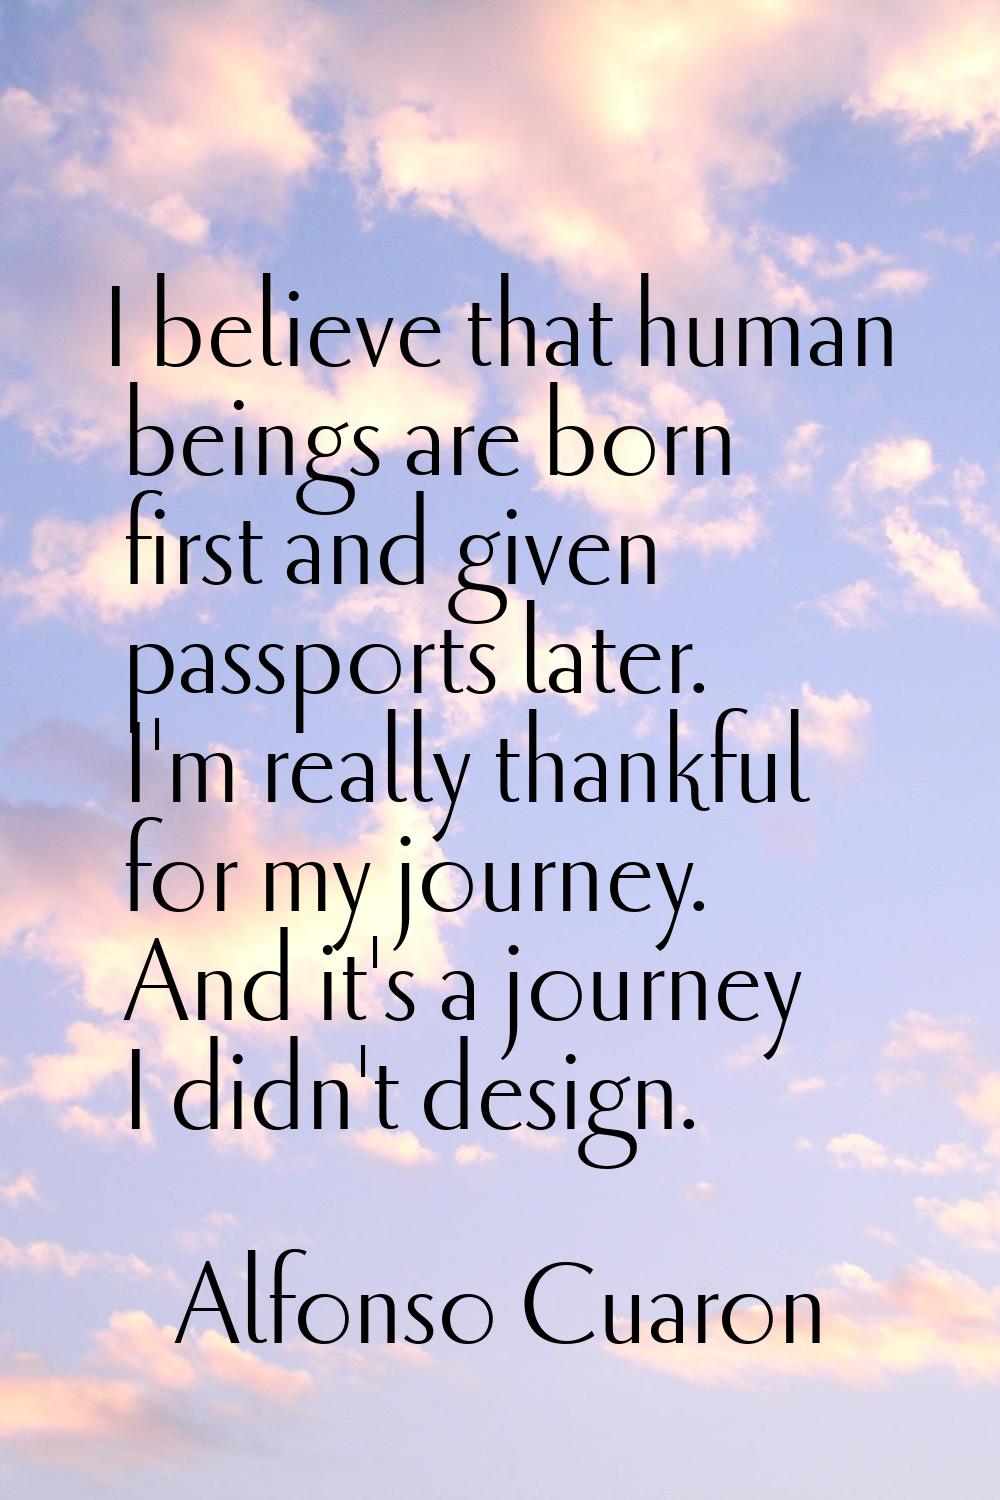 I believe that human beings are born first and given passports later. I'm really thankful for my jo